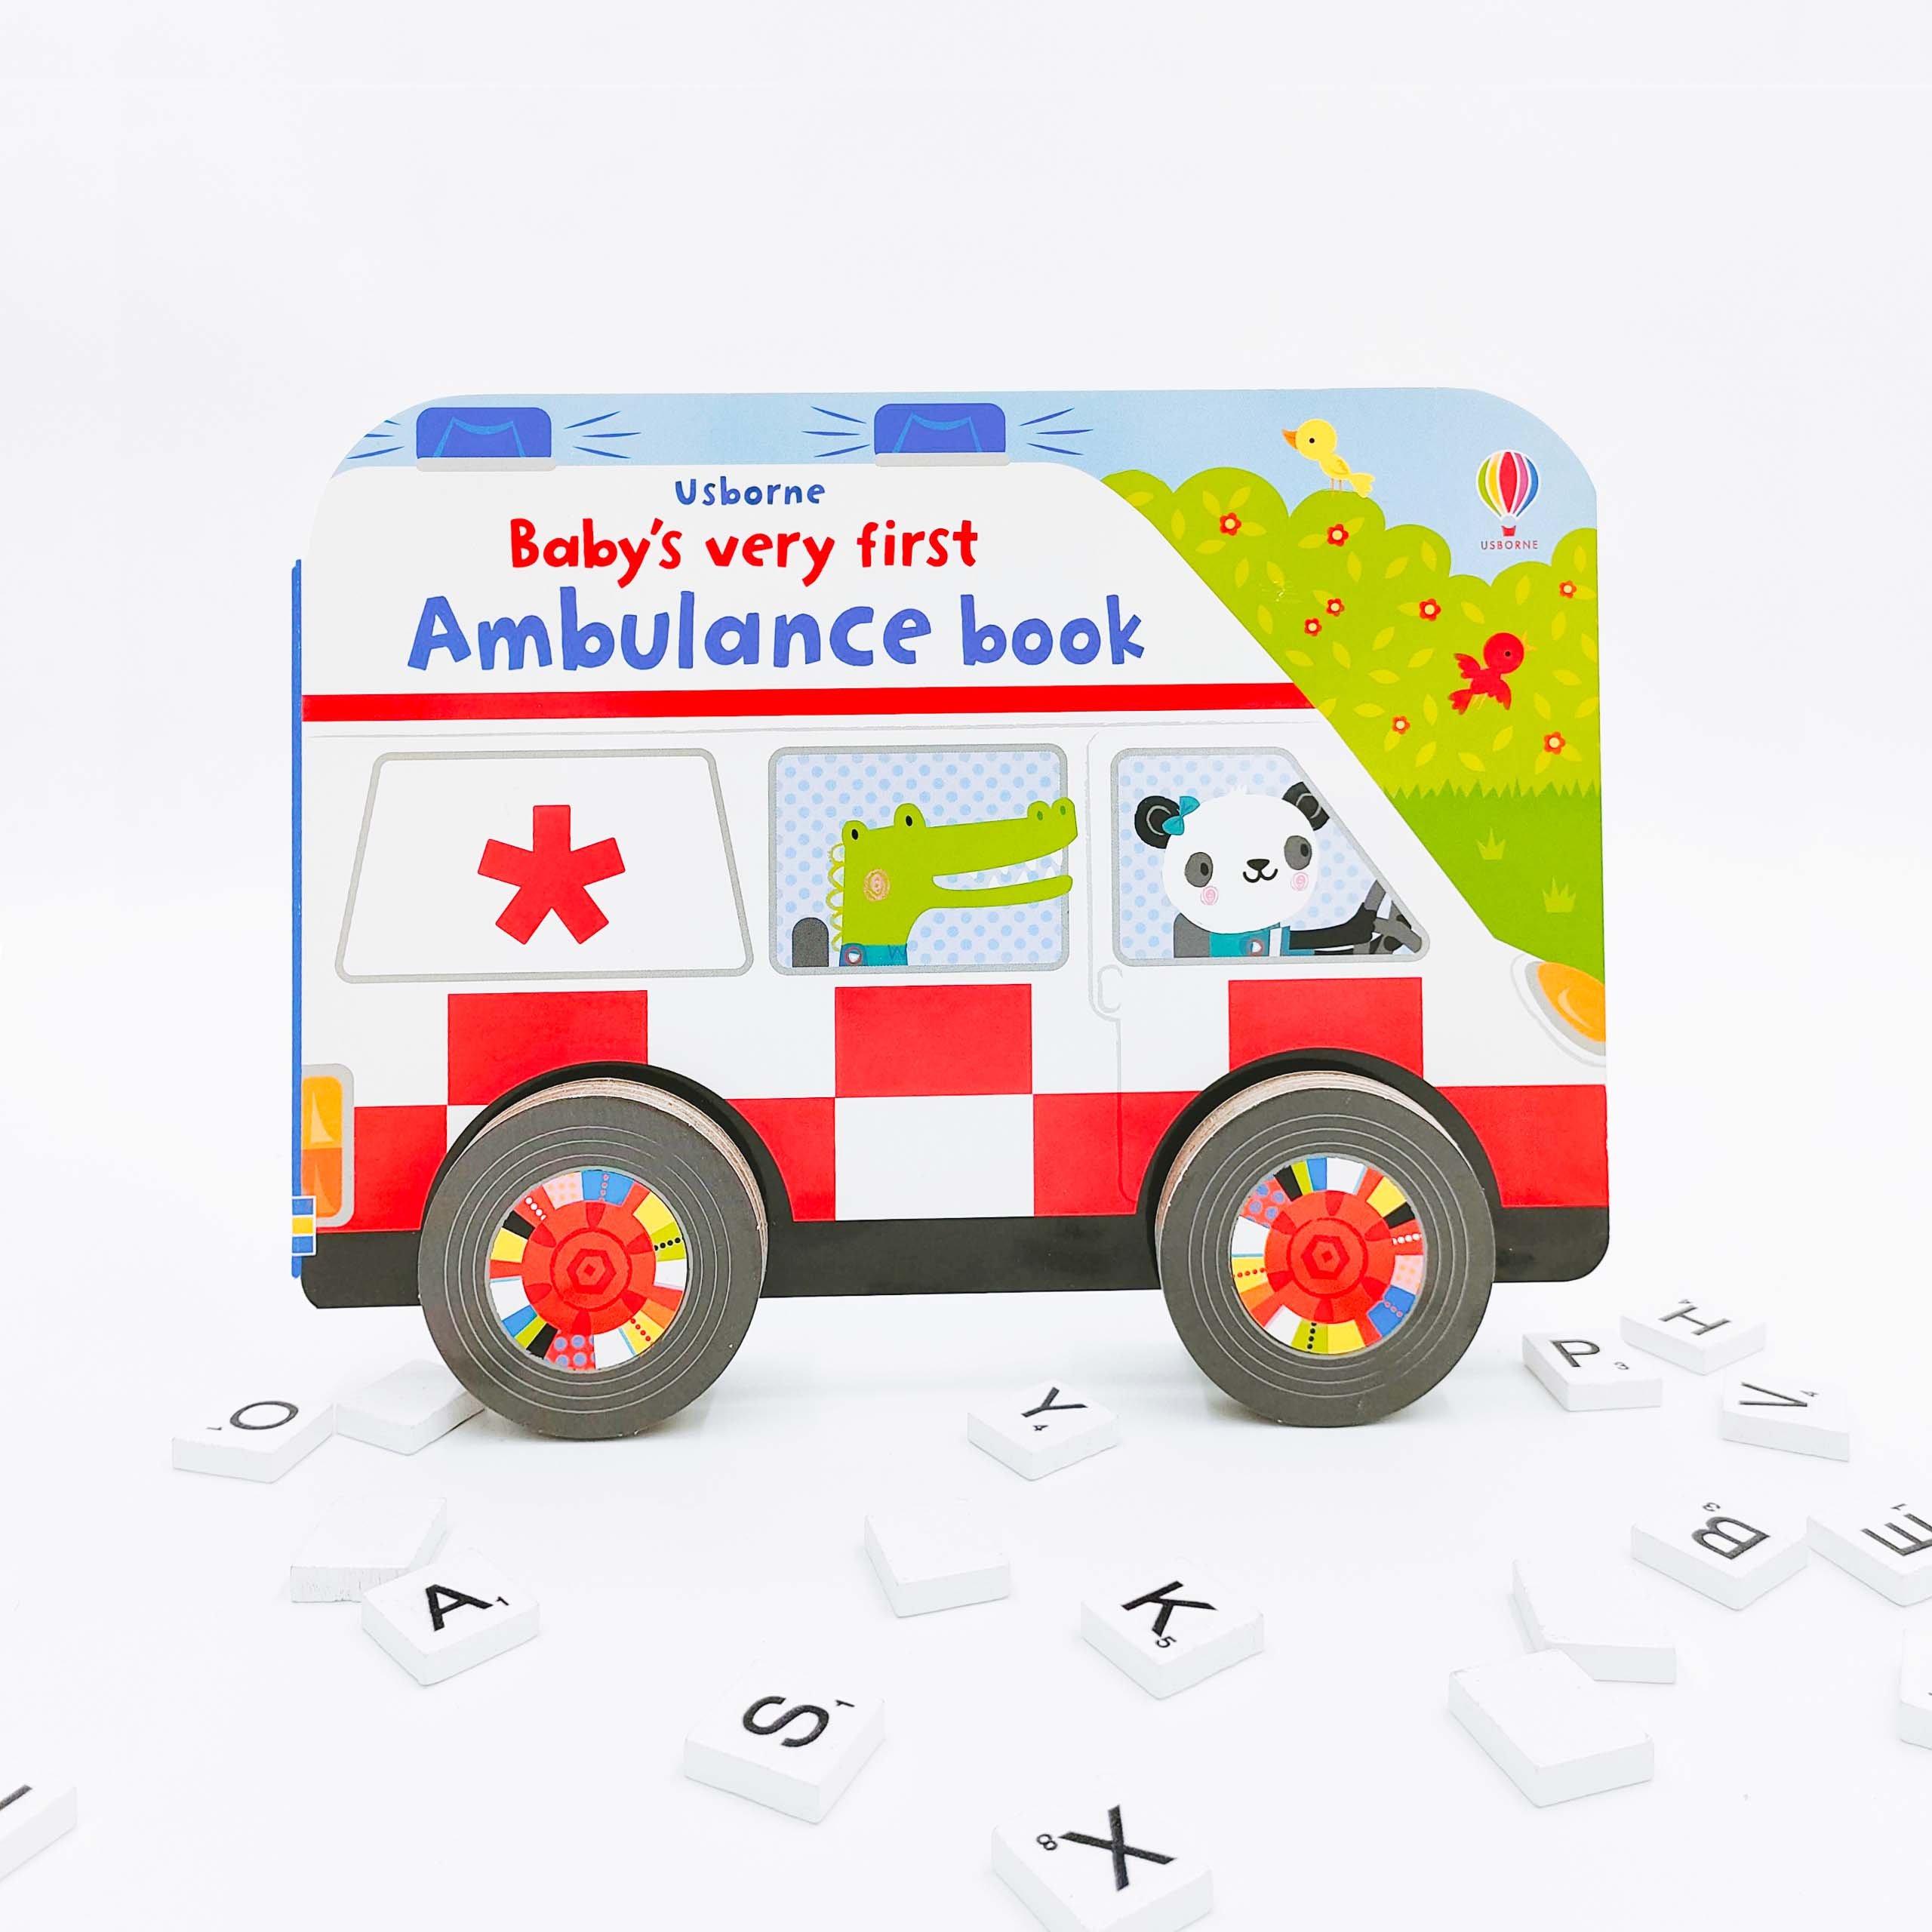 Baby's very first Ambulance book